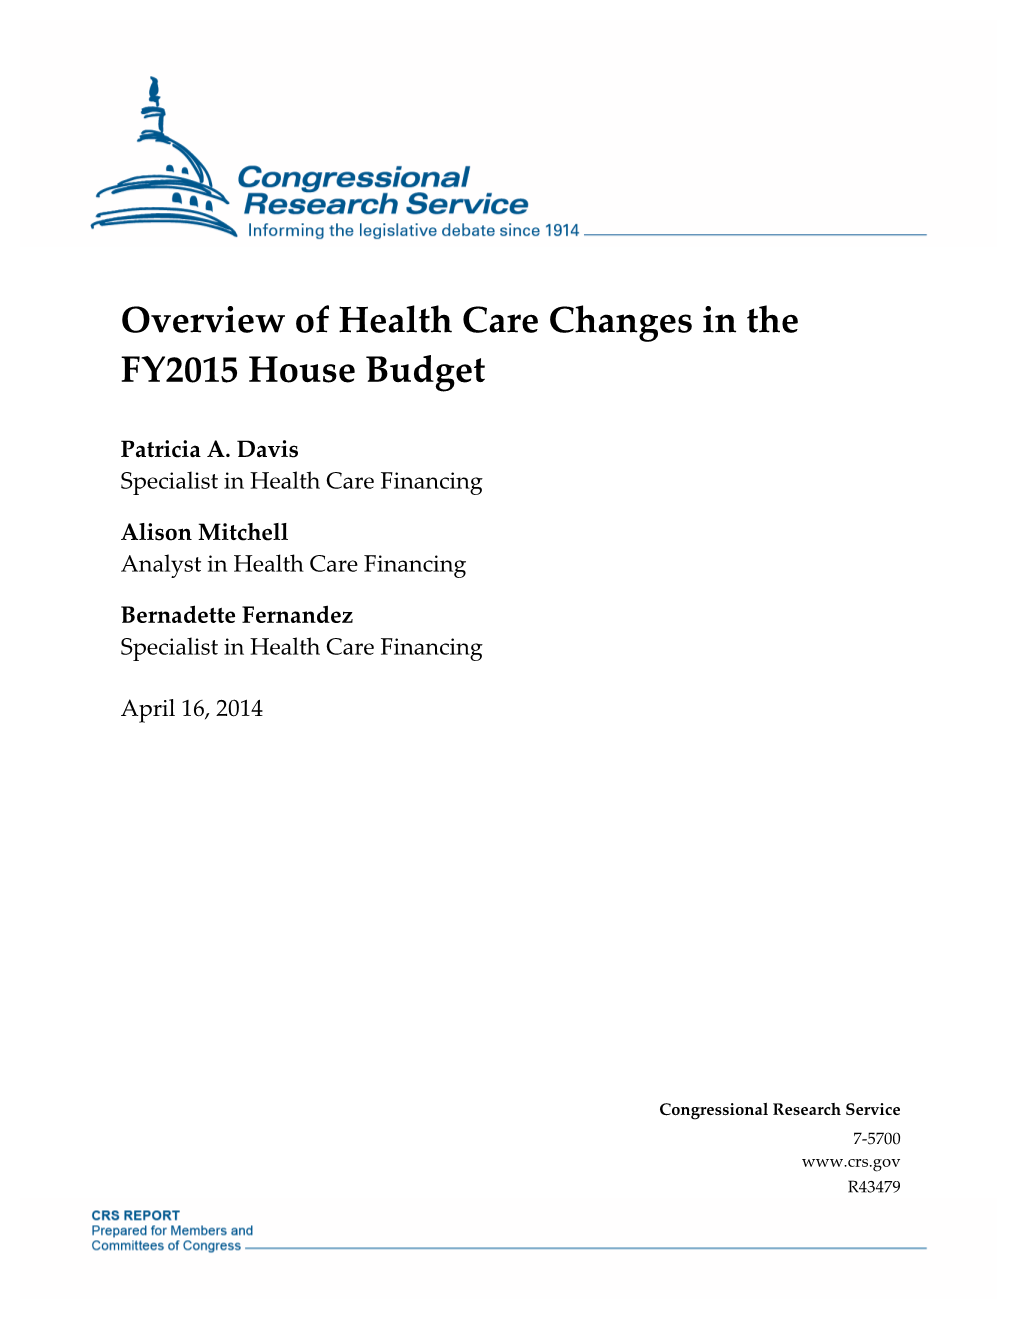 Overview of Health Care Changes in the FY2015 House Budget